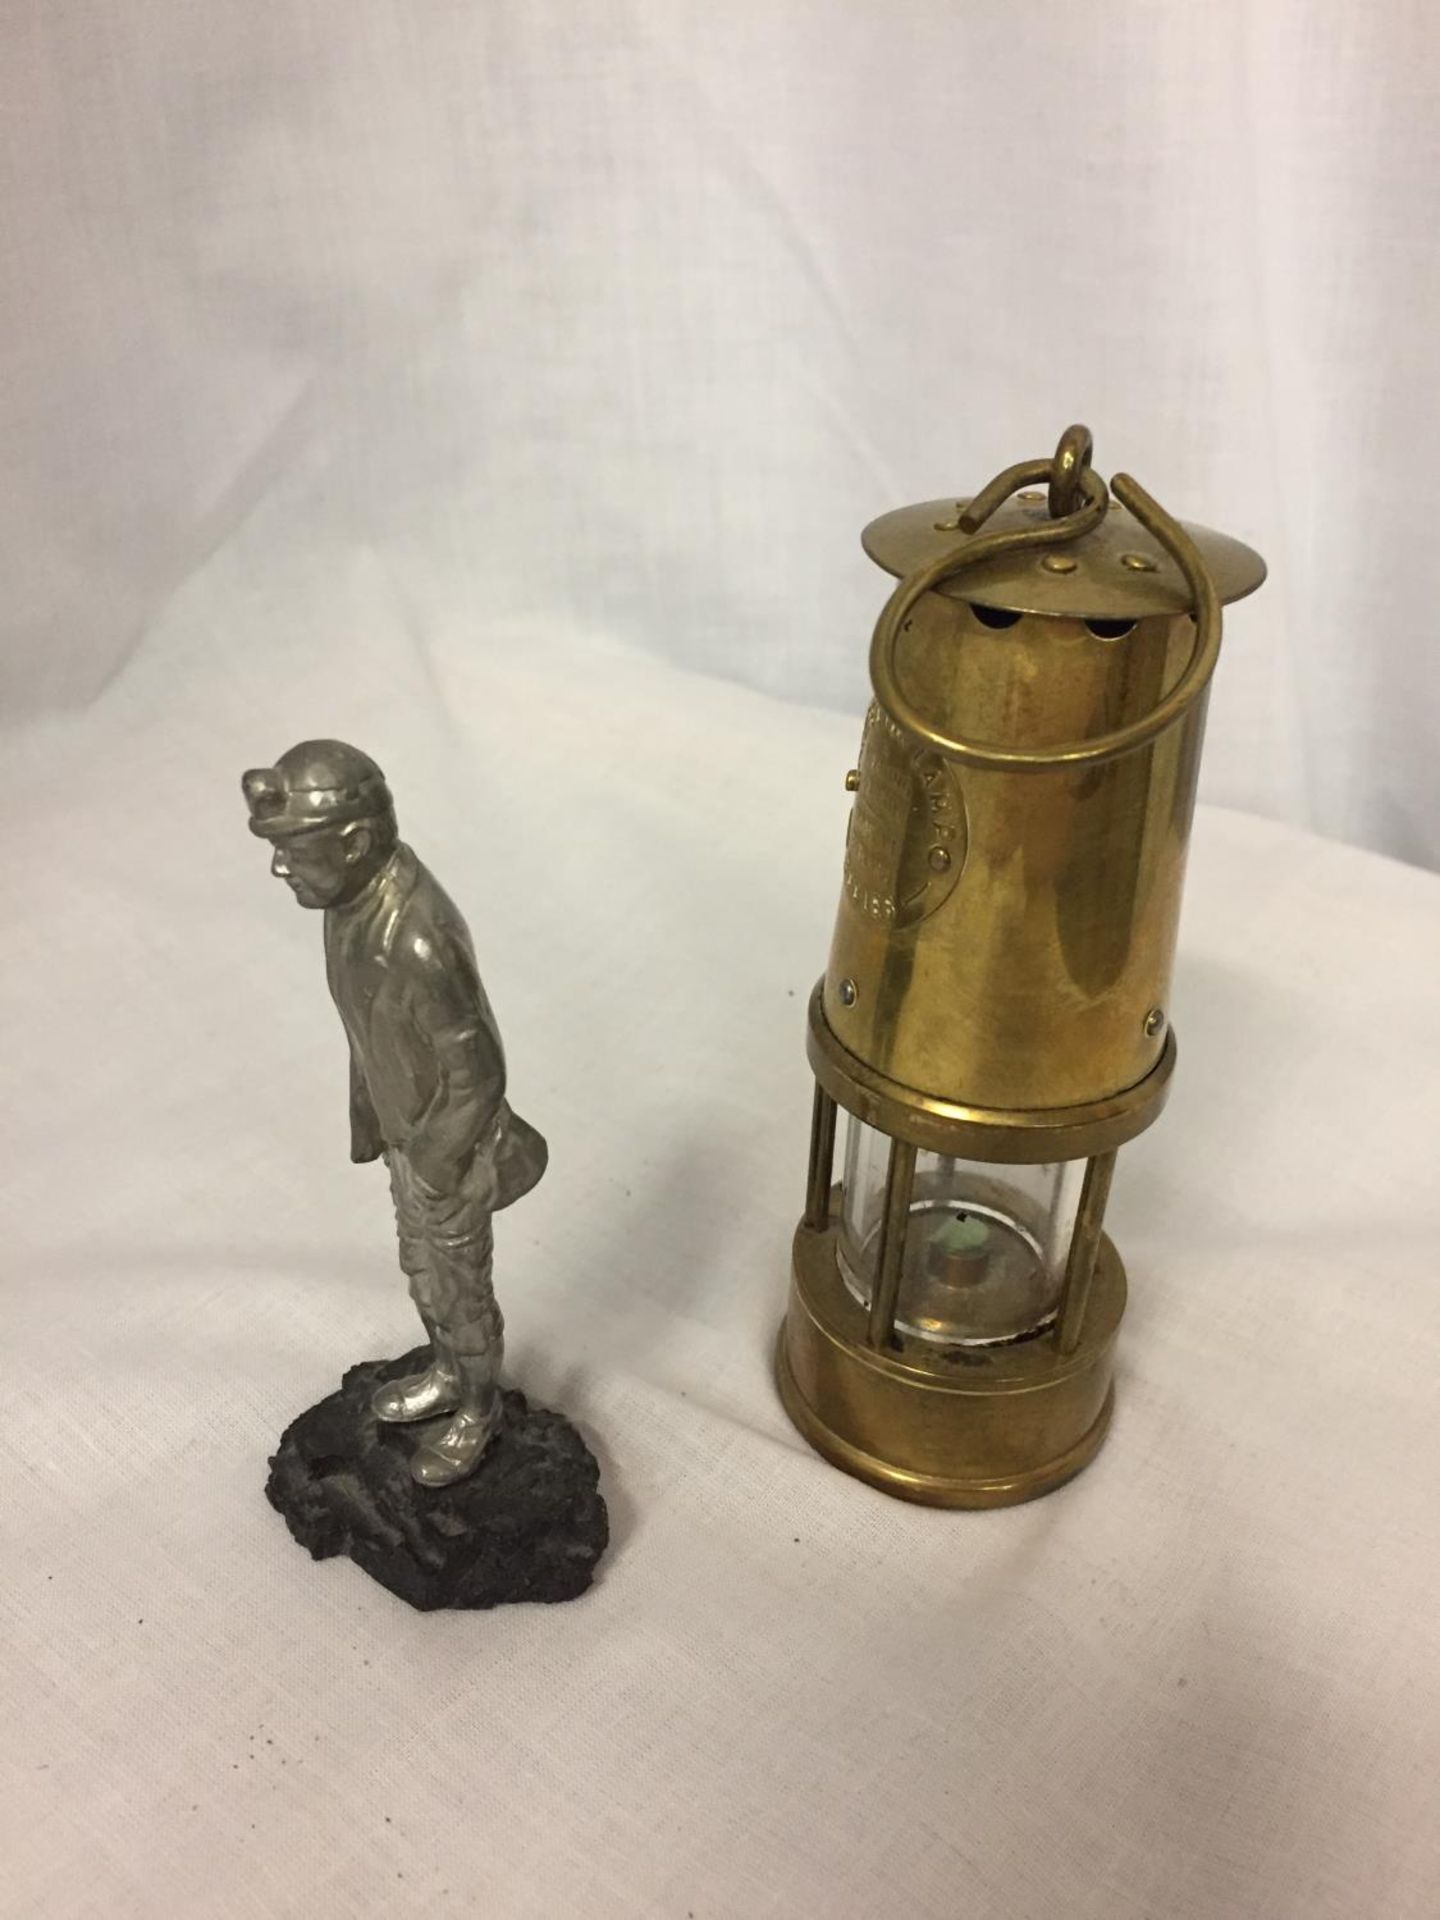 A BRASS MINATURE MINERS PROTECTION LAMP ECCLES AND A FIGURE OF A MINER - Image 2 of 3